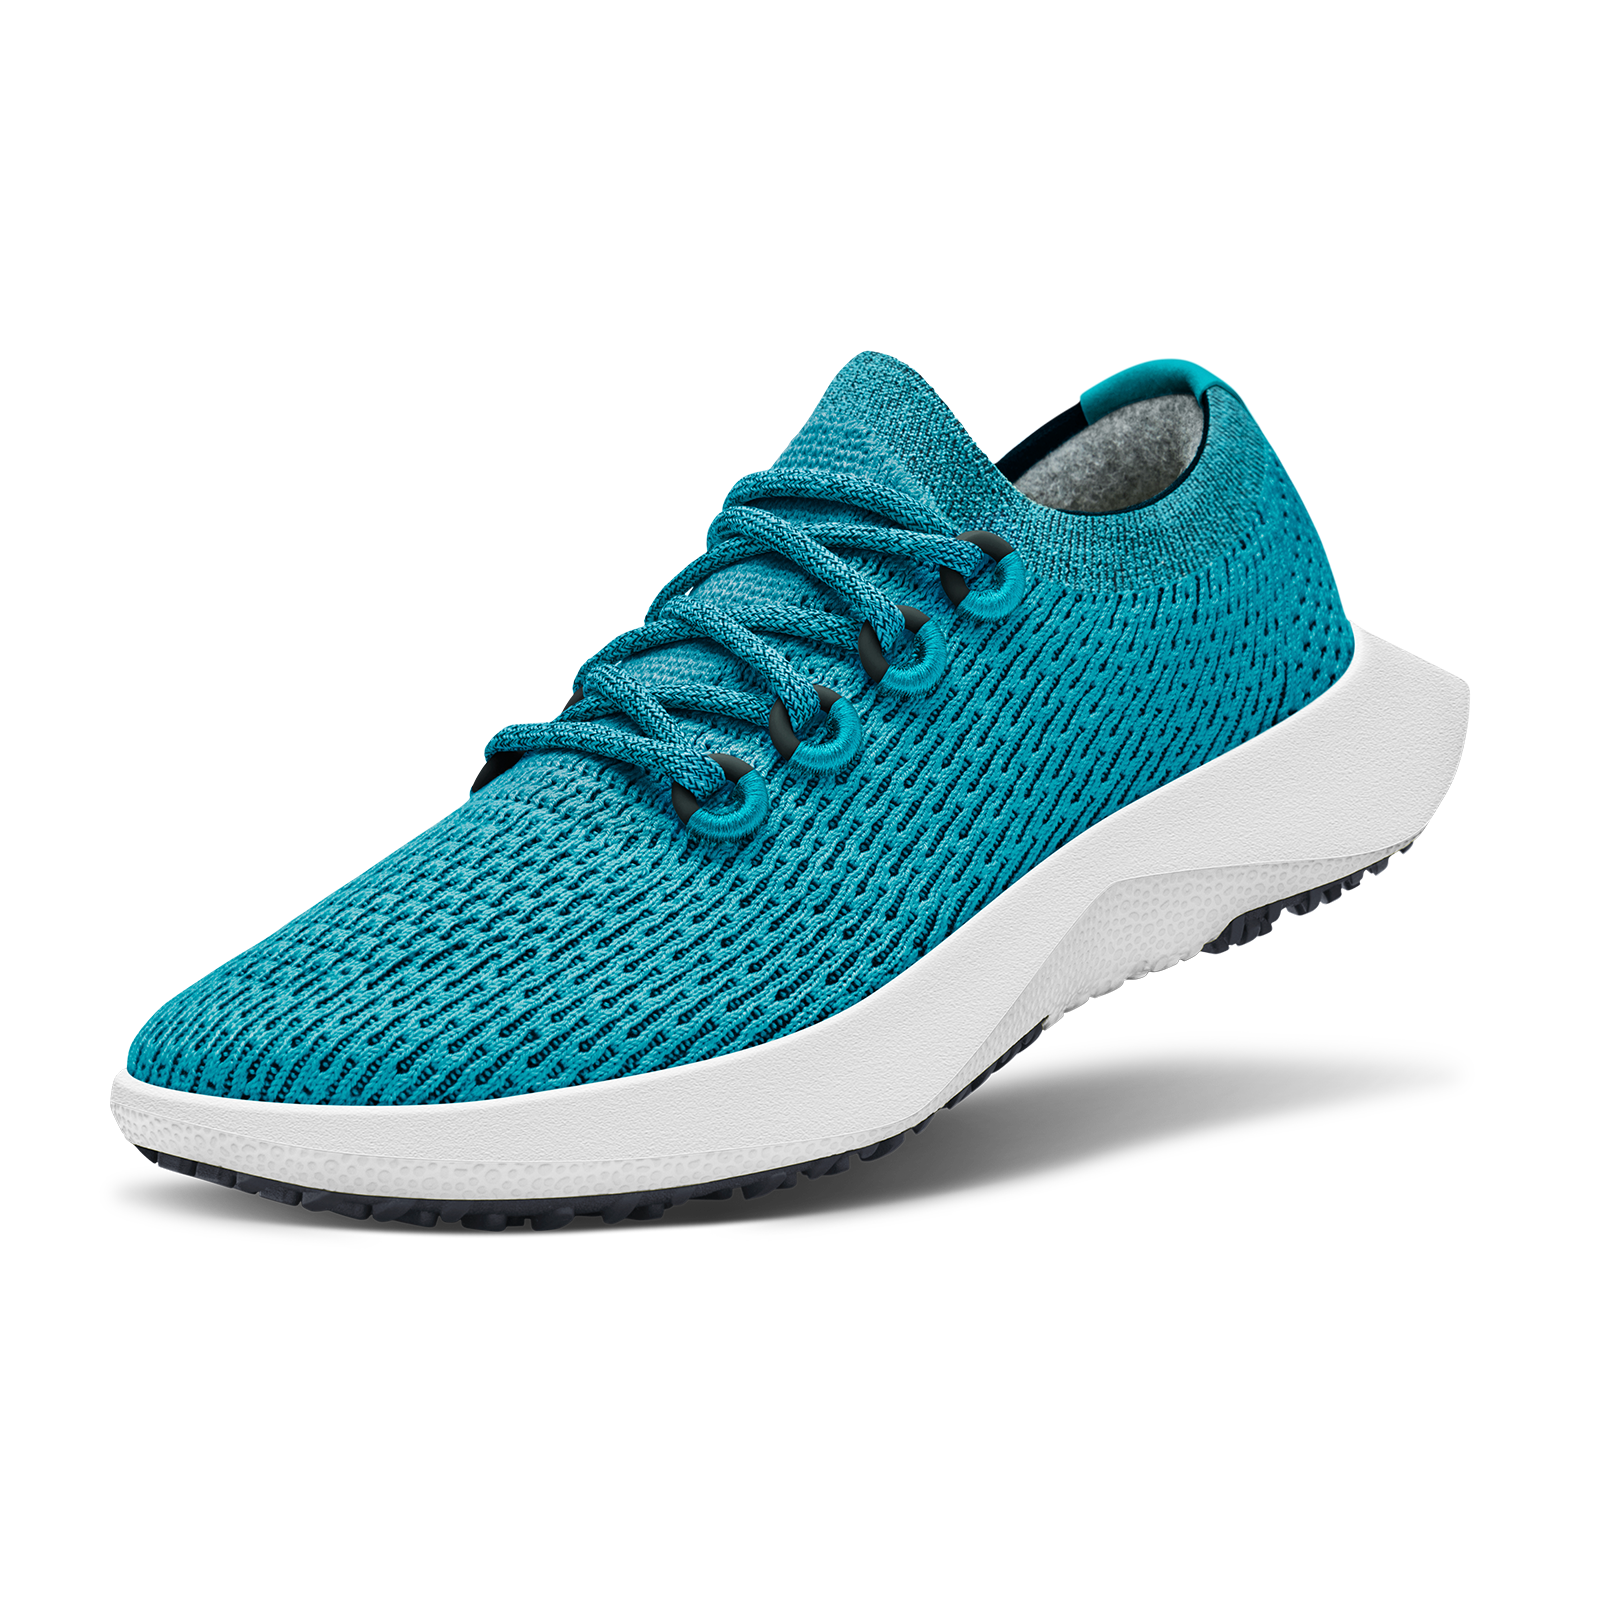 Men's Tree Dasher 2 - Thrive Teal (Blizzard Sole)